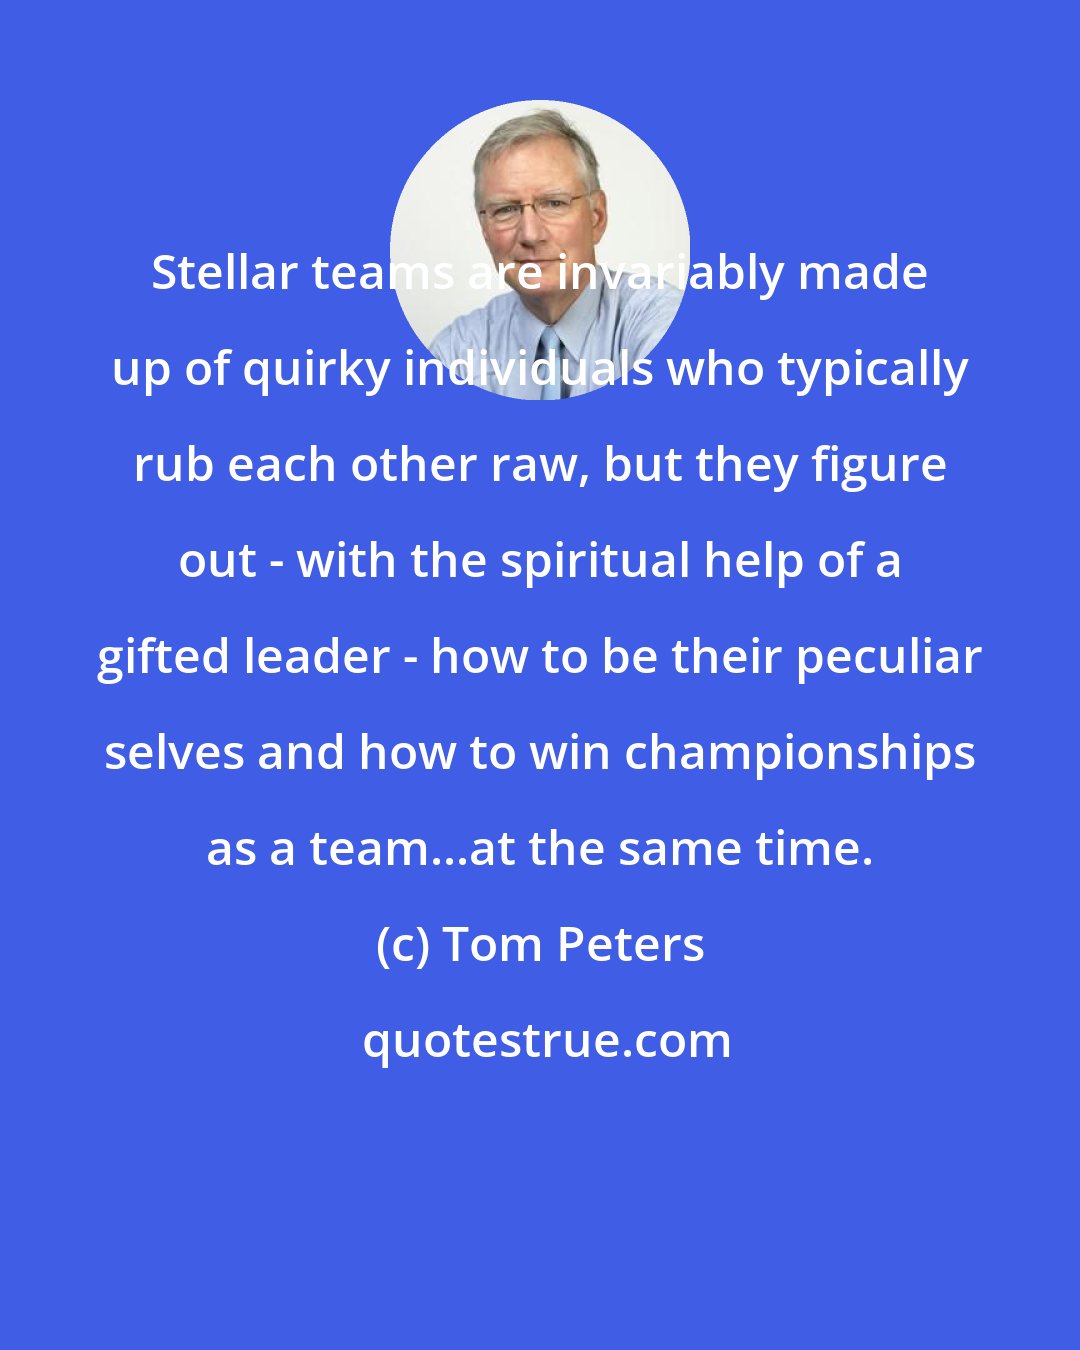 Tom Peters: Stellar teams are invariably made up of quirky individuals who typically rub each other raw, but they figure out - with the spiritual help of a gifted leader - how to be their peculiar selves and how to win championships as a team...at the same time.